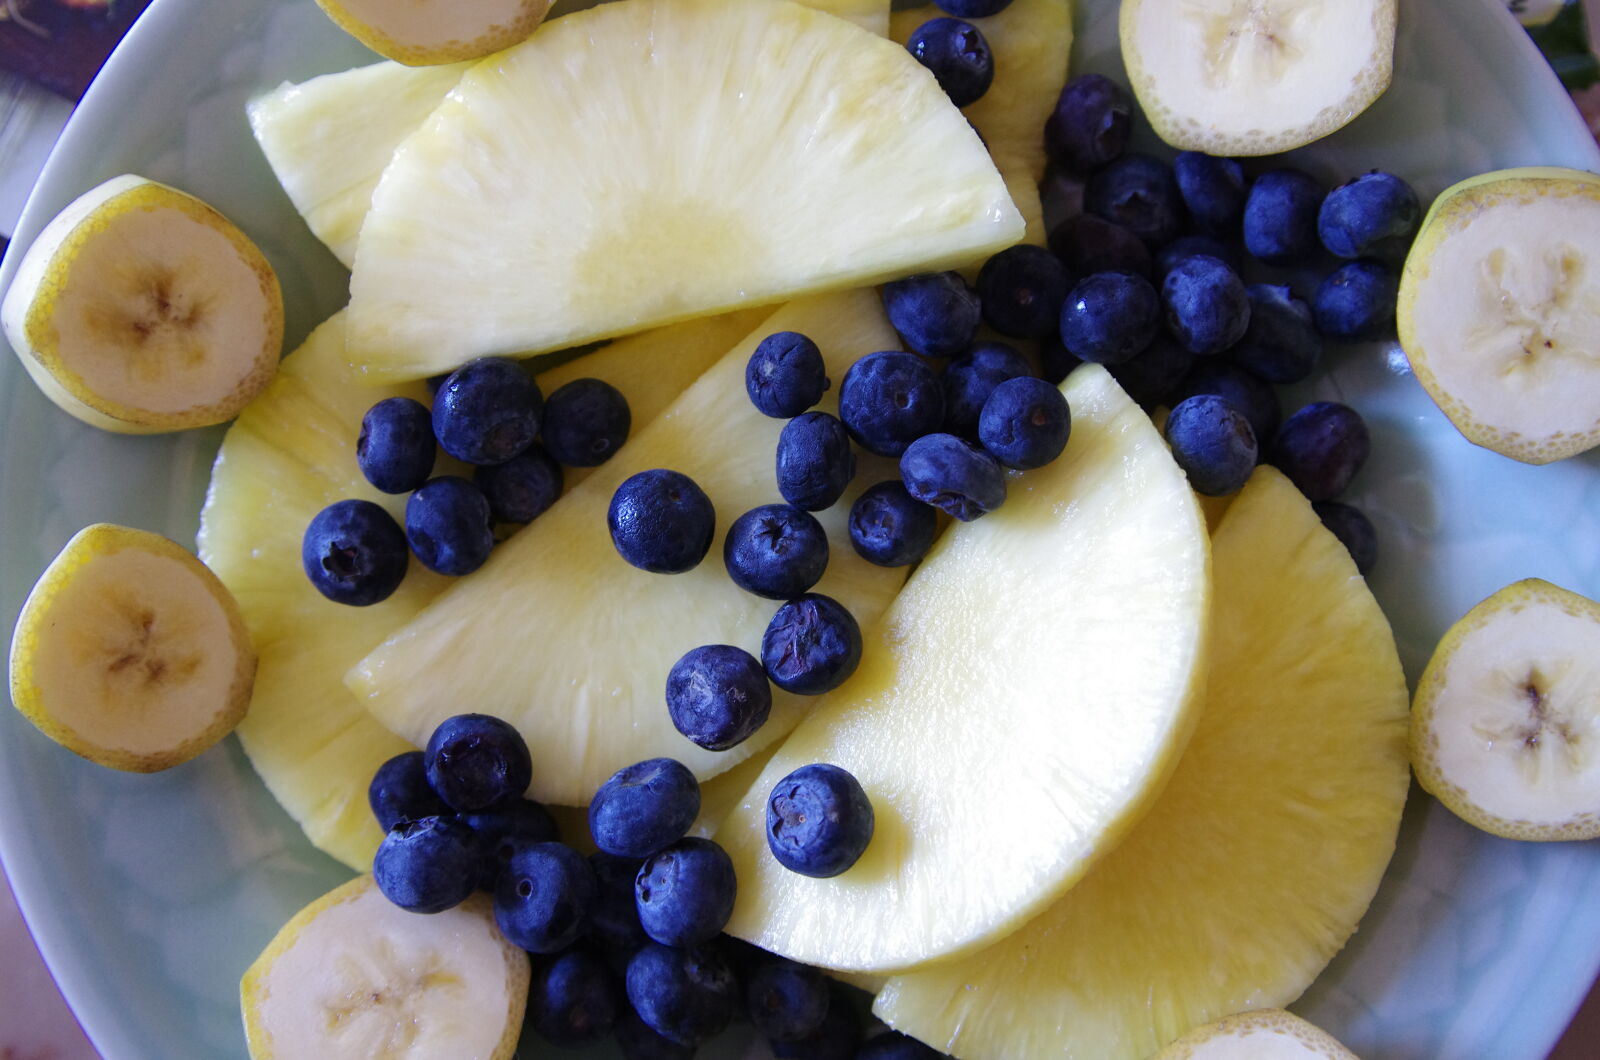 Tamron AF 28-75mm F2.8 XR Di LD Aspherical (IF) sample photo. Bananas, blueberries, food, photography photography